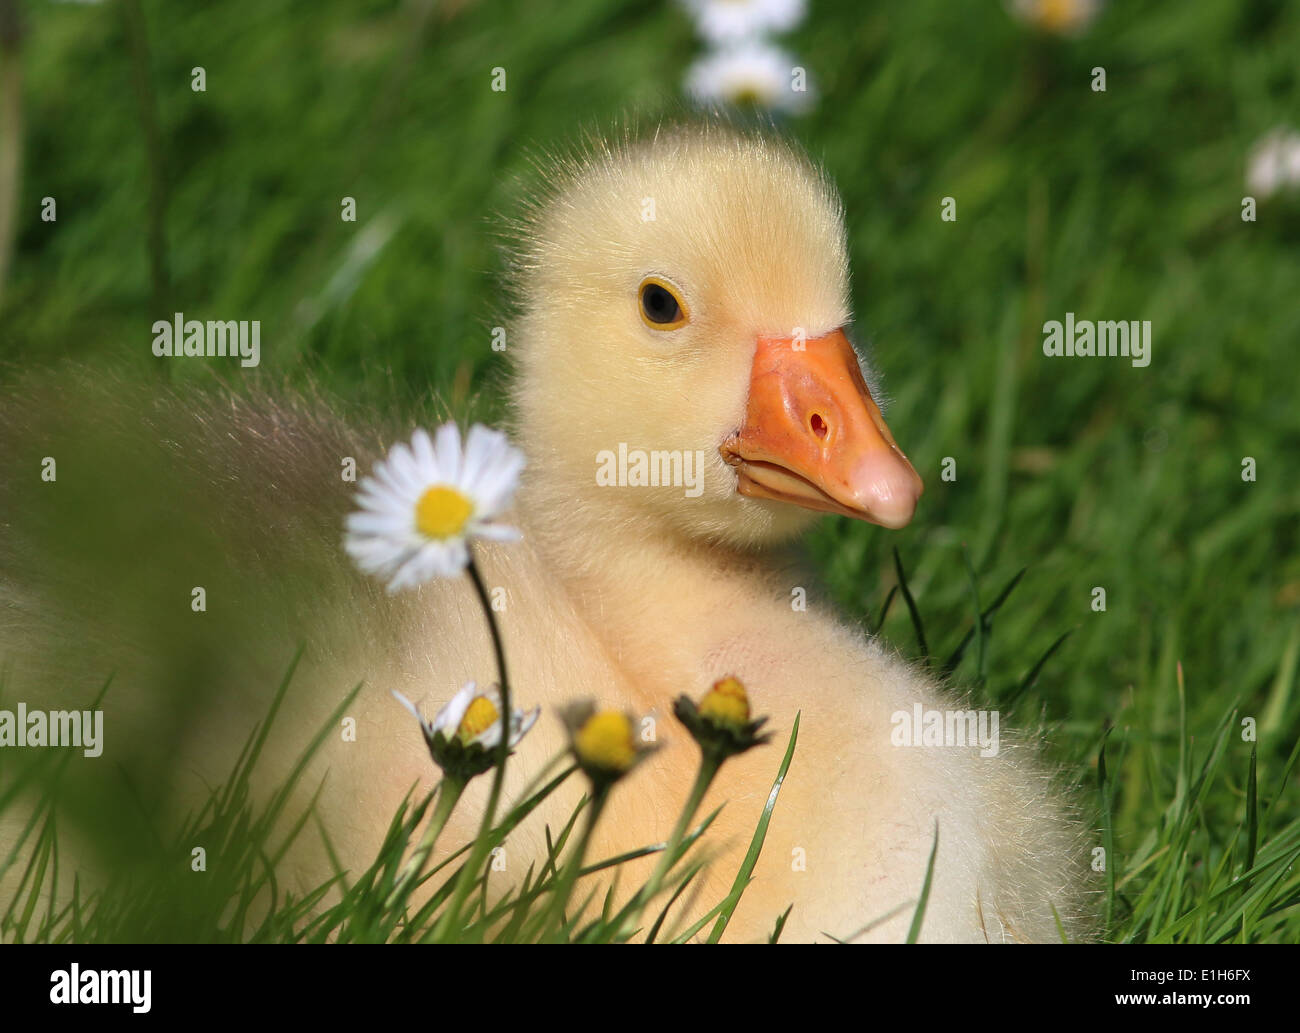 Cute fluffy baby gosling (Anser anser domesticus) in close-up, profile view Stock Photo